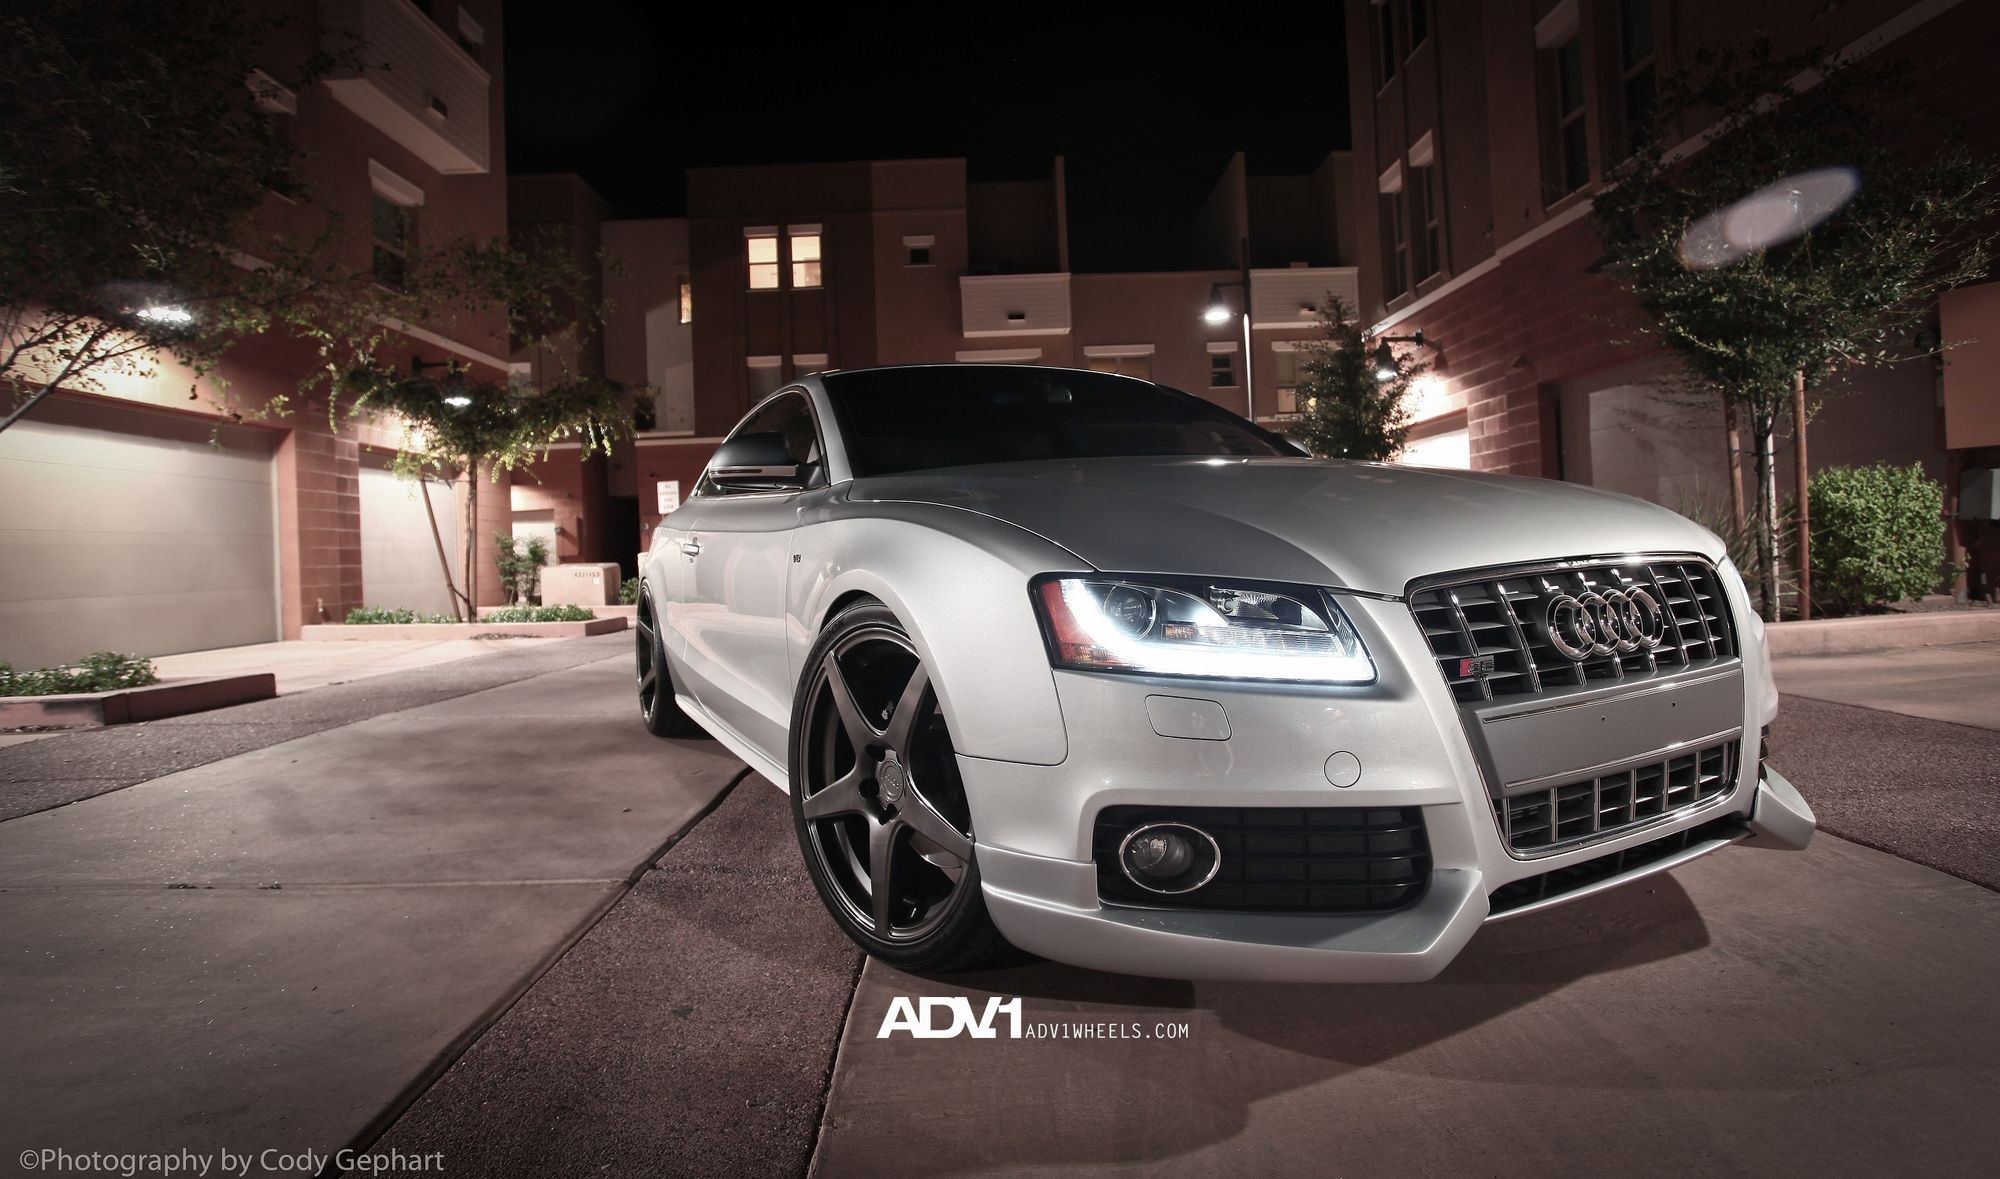 Silver Audi S5 with Chrome Grille - Photo by ADV.1